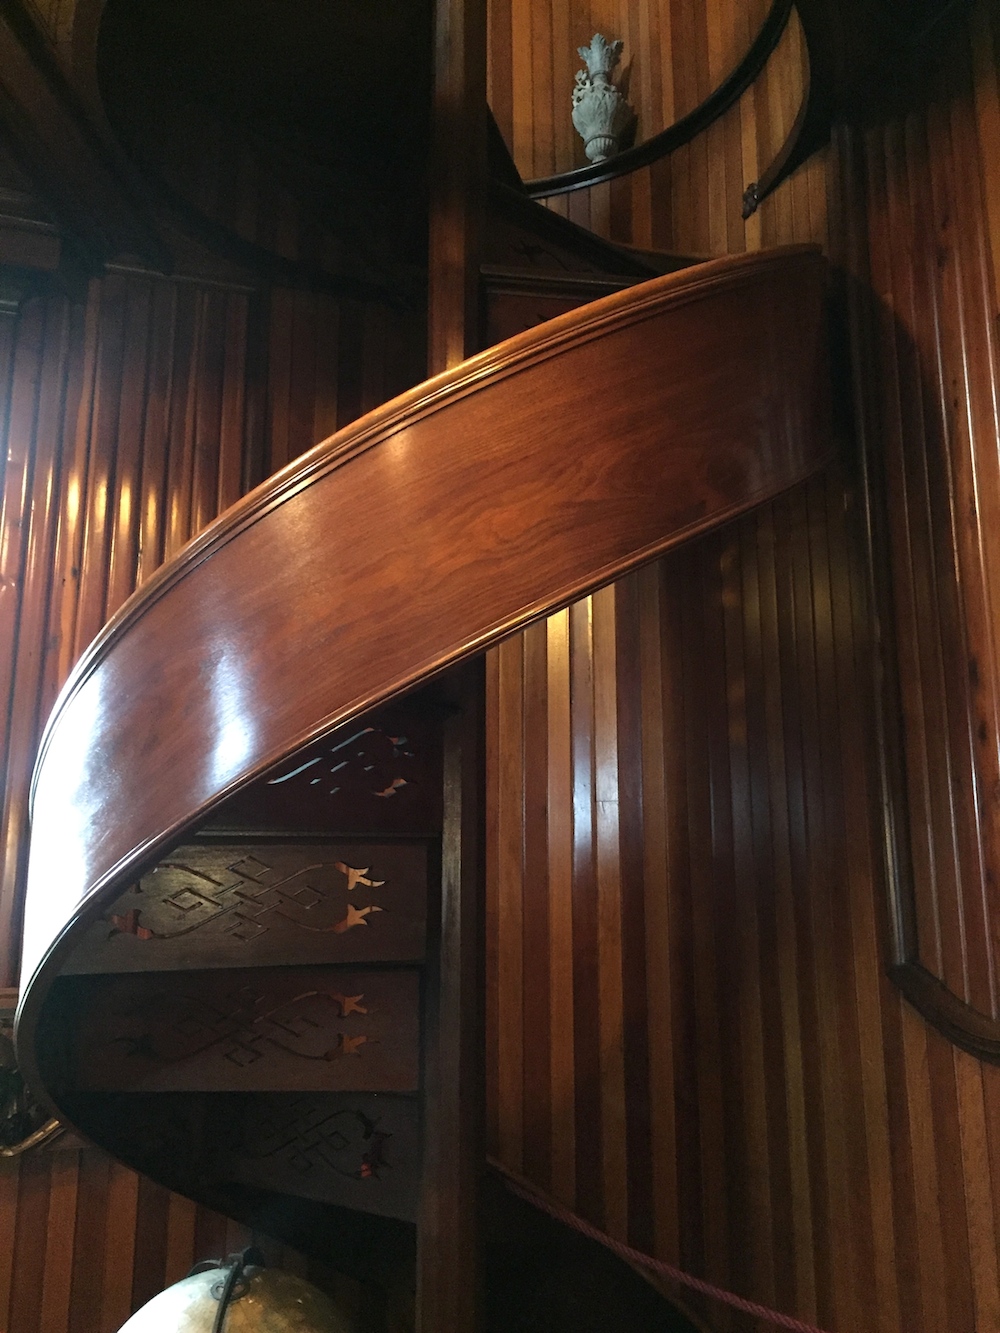 Spiral staircase in the library of the historic Tinker Swiss Cottage in Rockford, Illinois